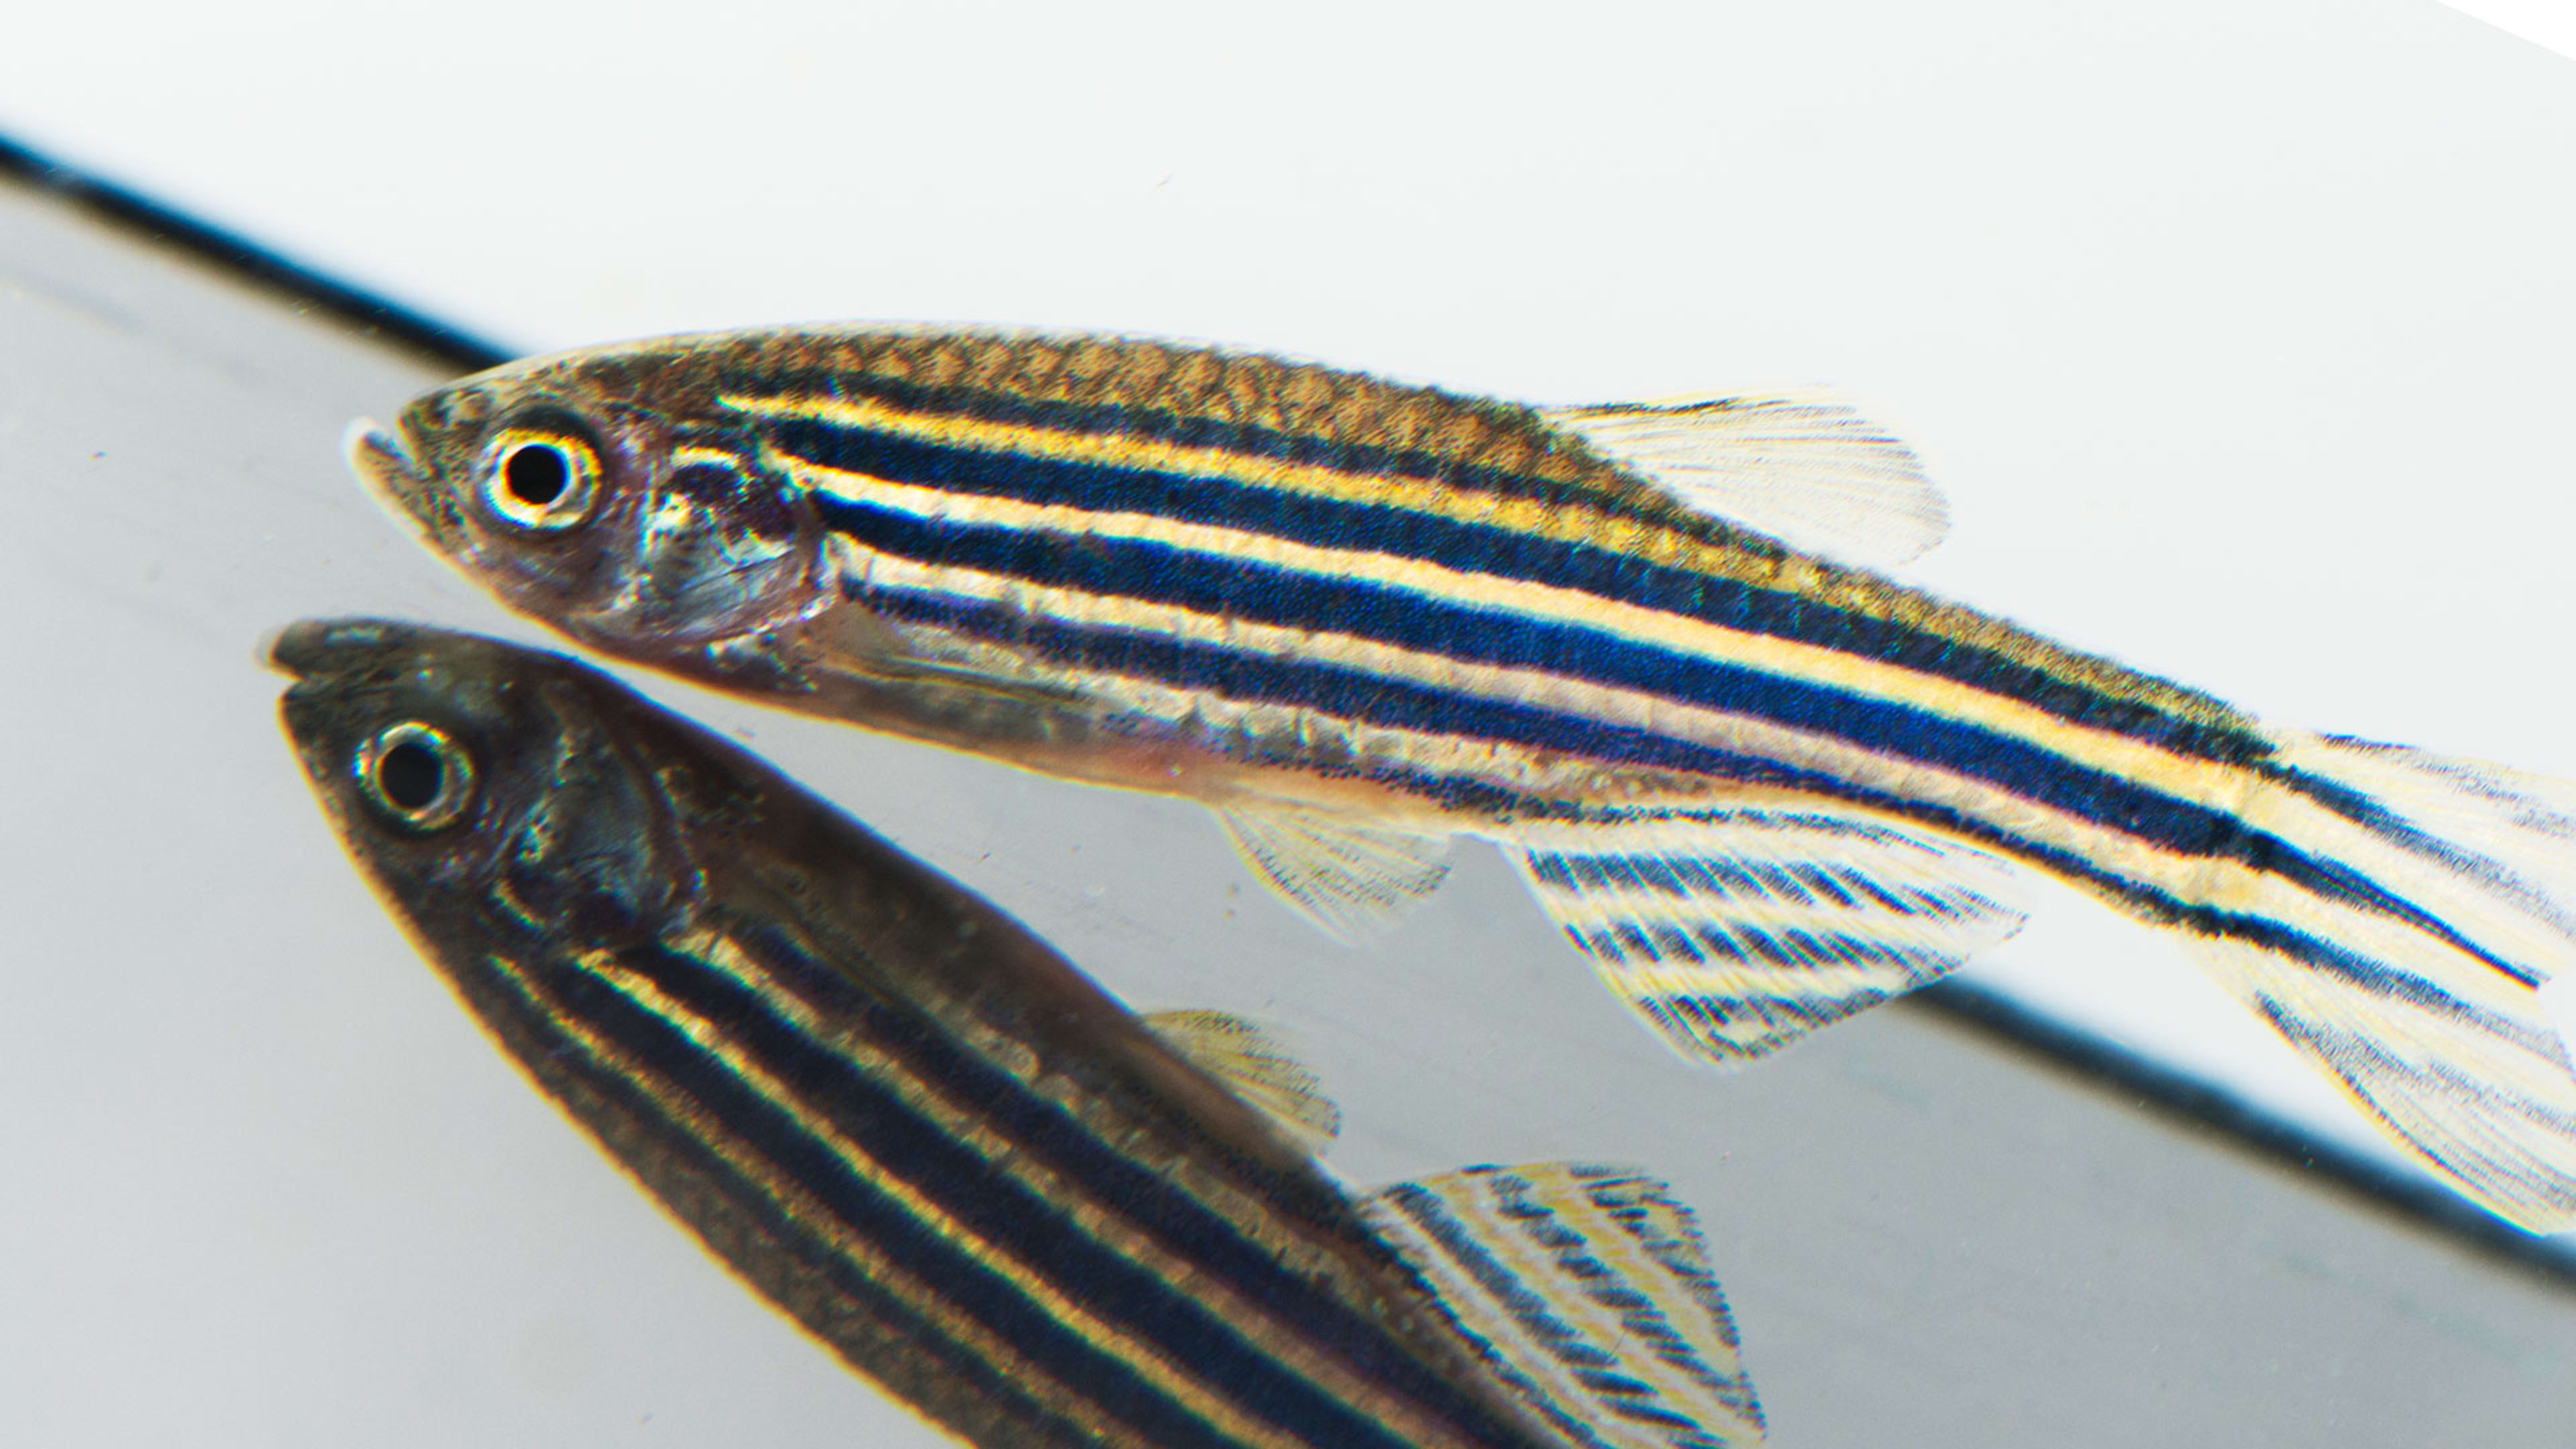 To Find A Cure For Blindness, These Scientists Are Mimicking Fish Eyes